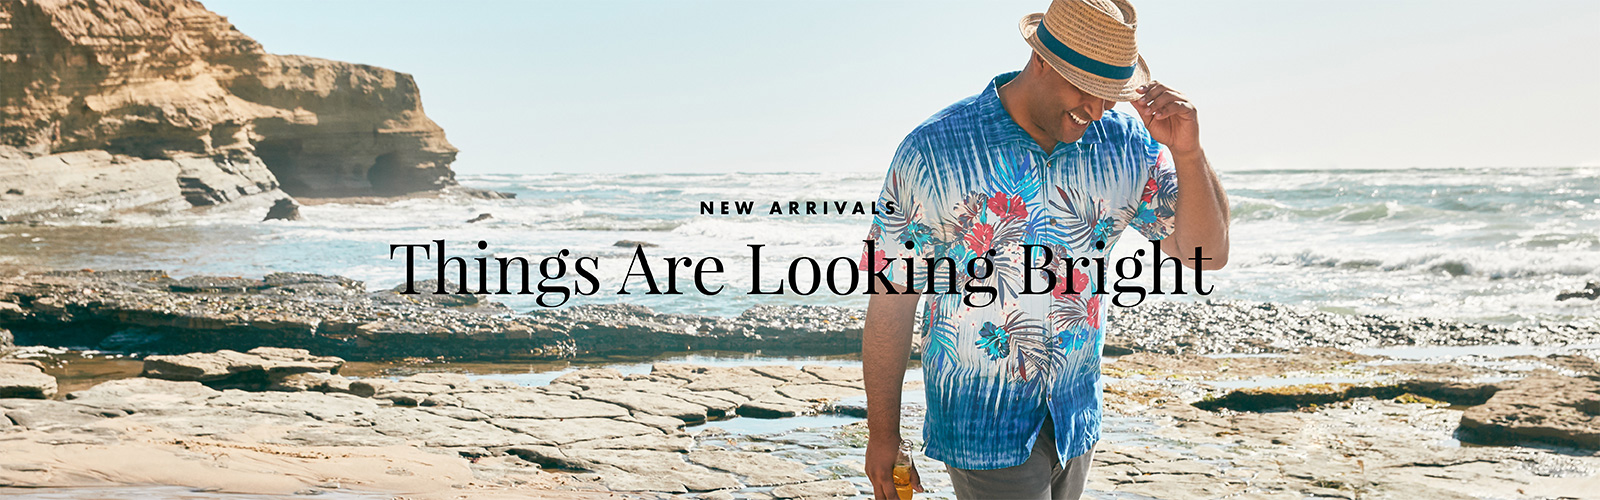 New Arrivals - Things Are Looking Bright